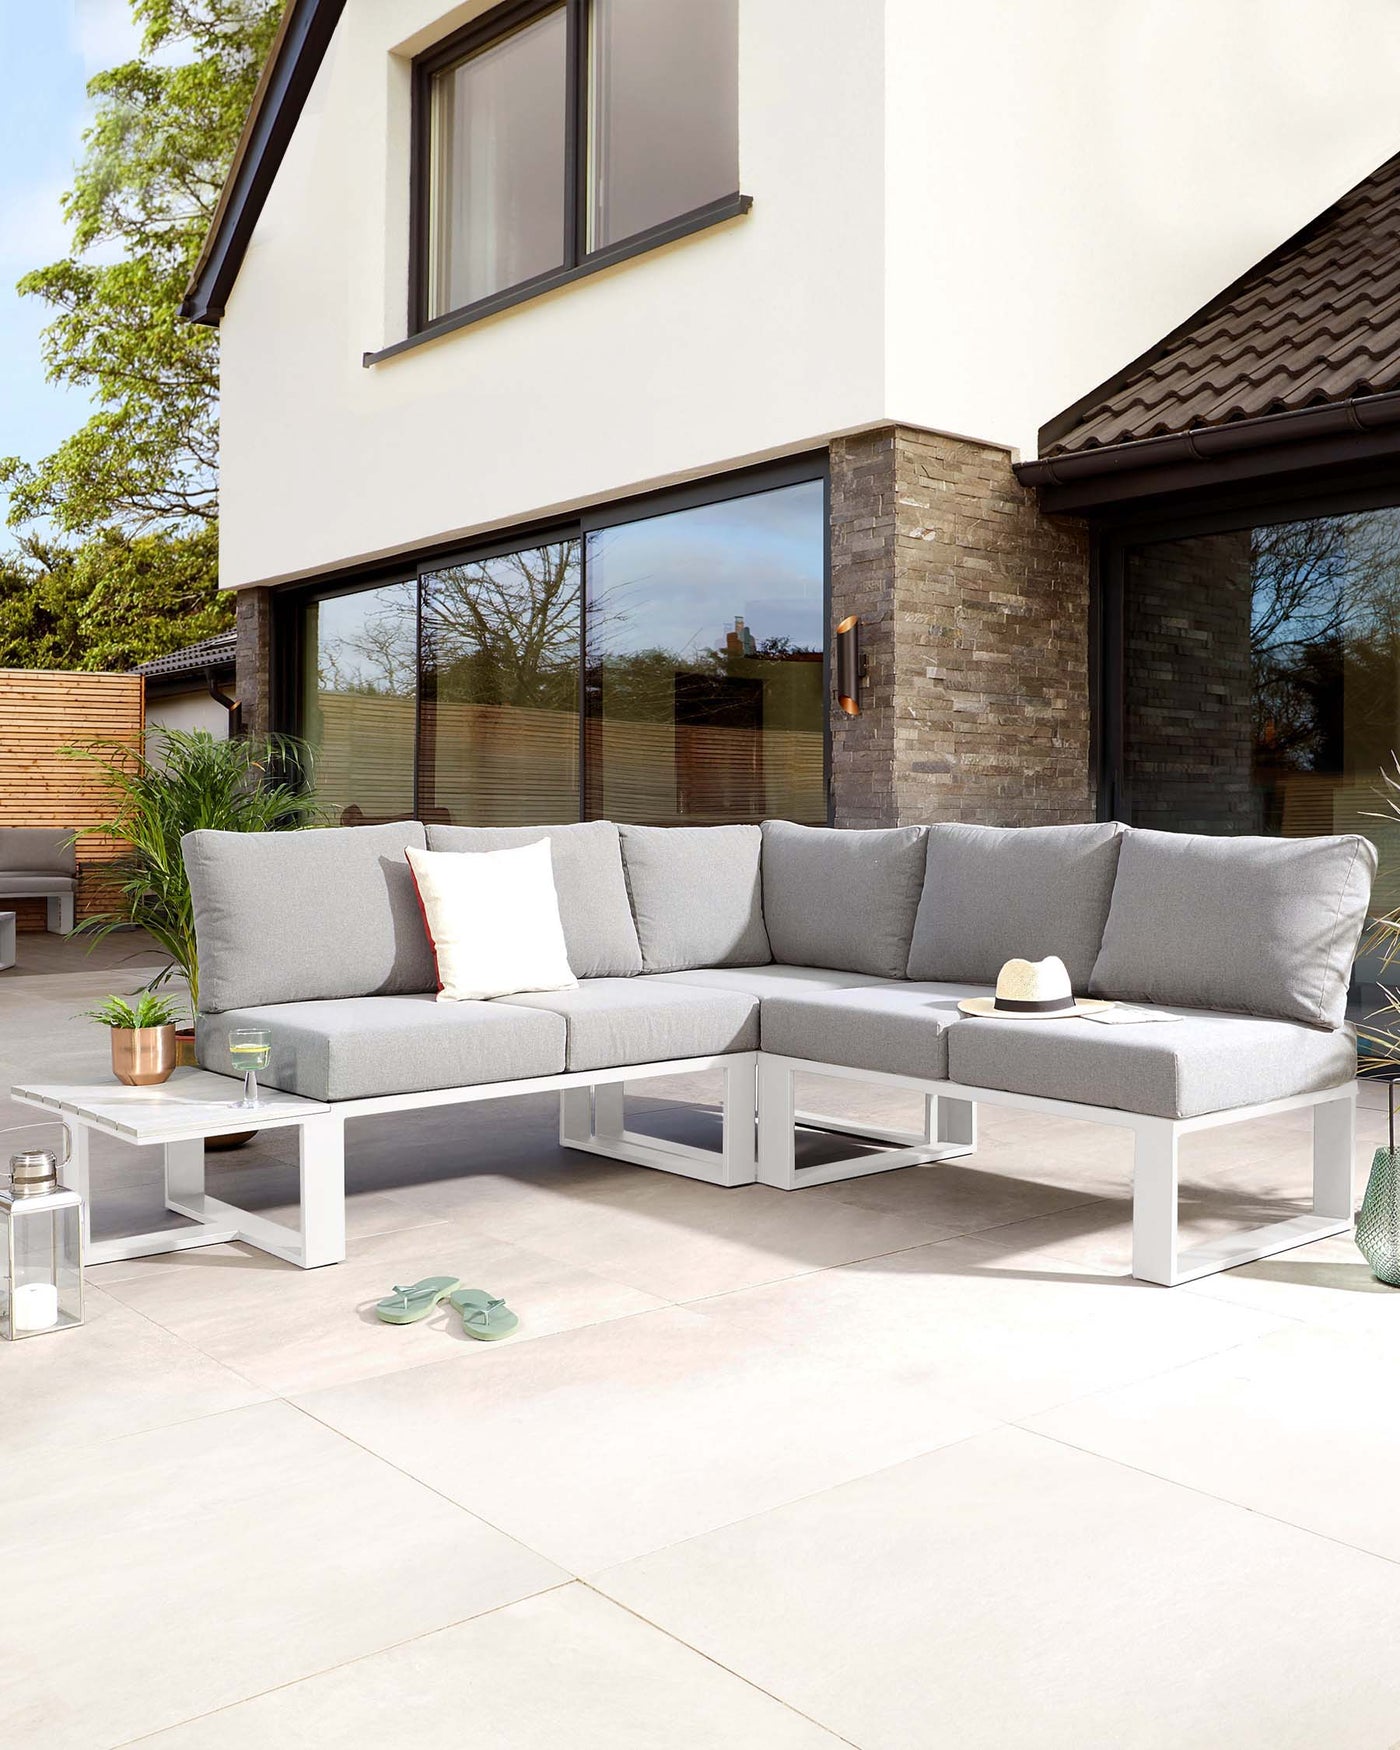 Modern outdoor L-shaped sectional sofa with light grey cushions on a white minimalist frame, paired with a white square coffee table featuring a lower shelf.